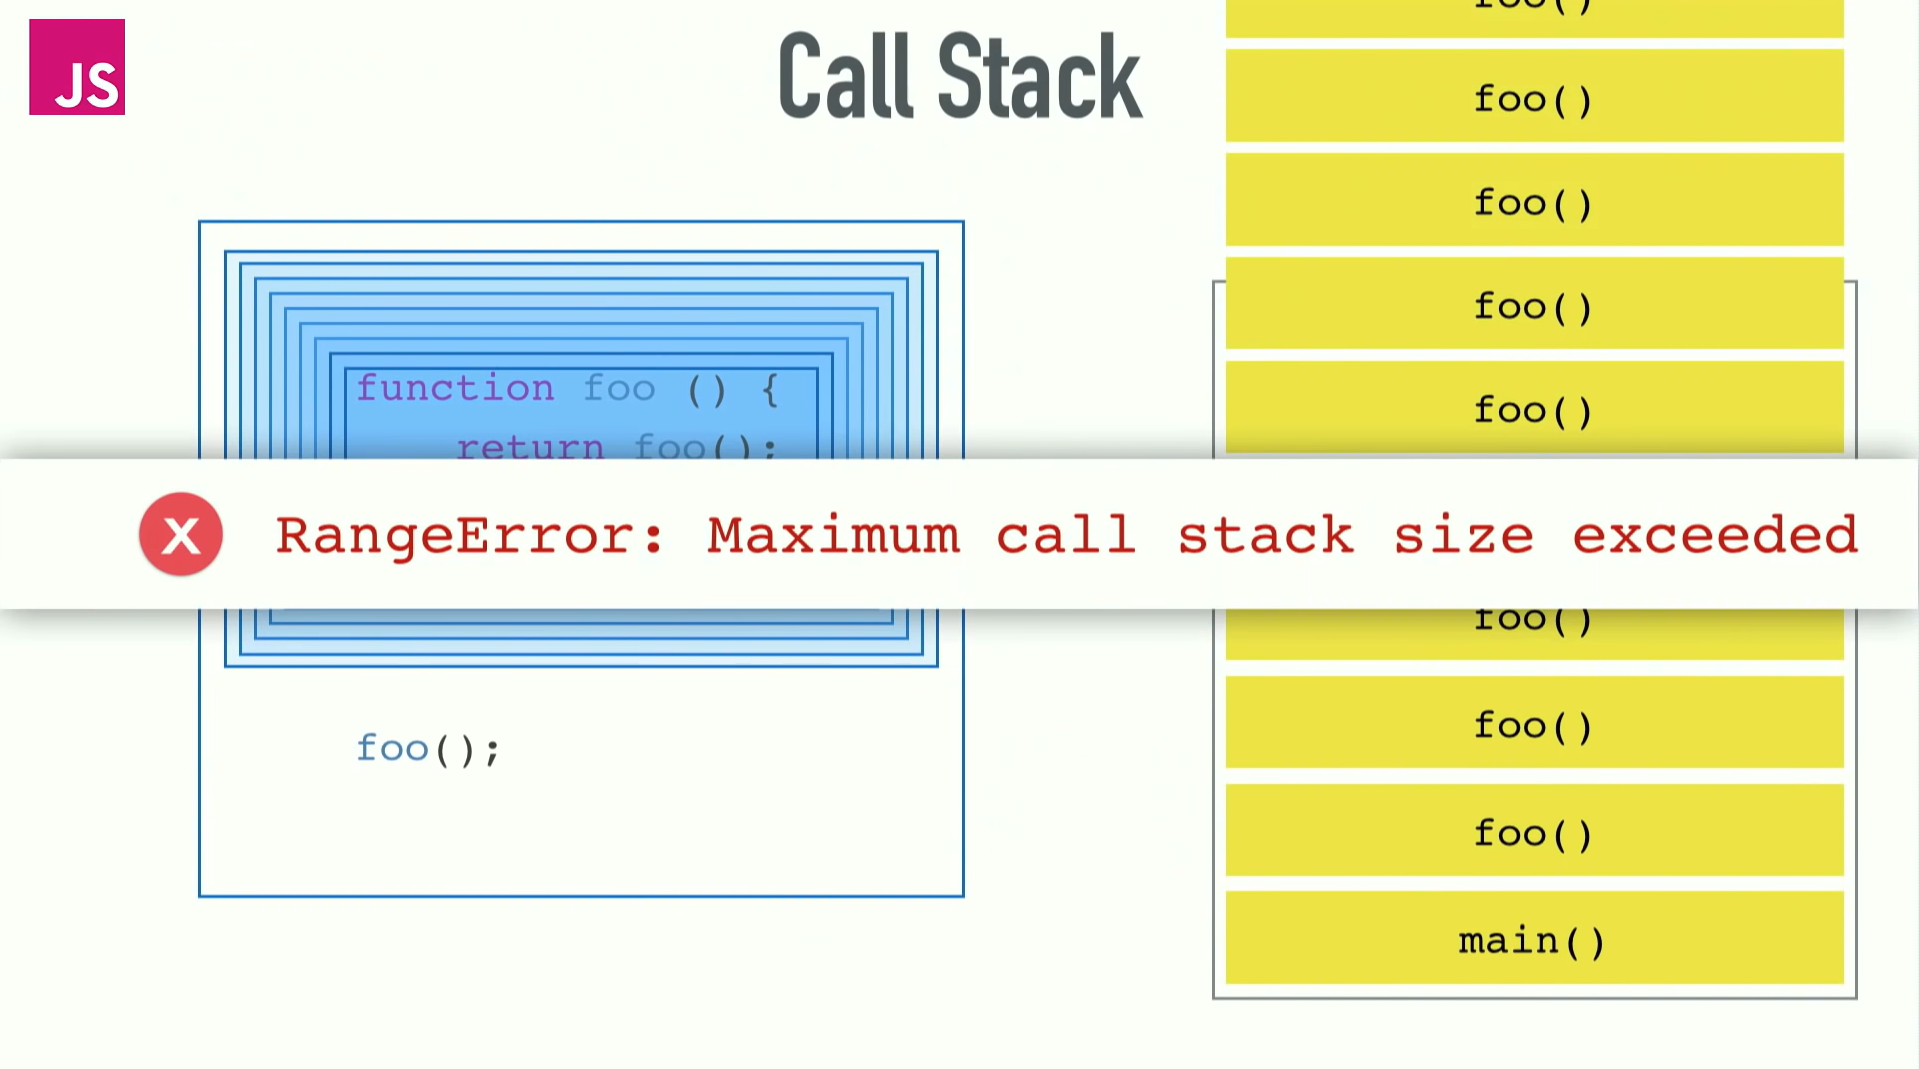 Call stack functions